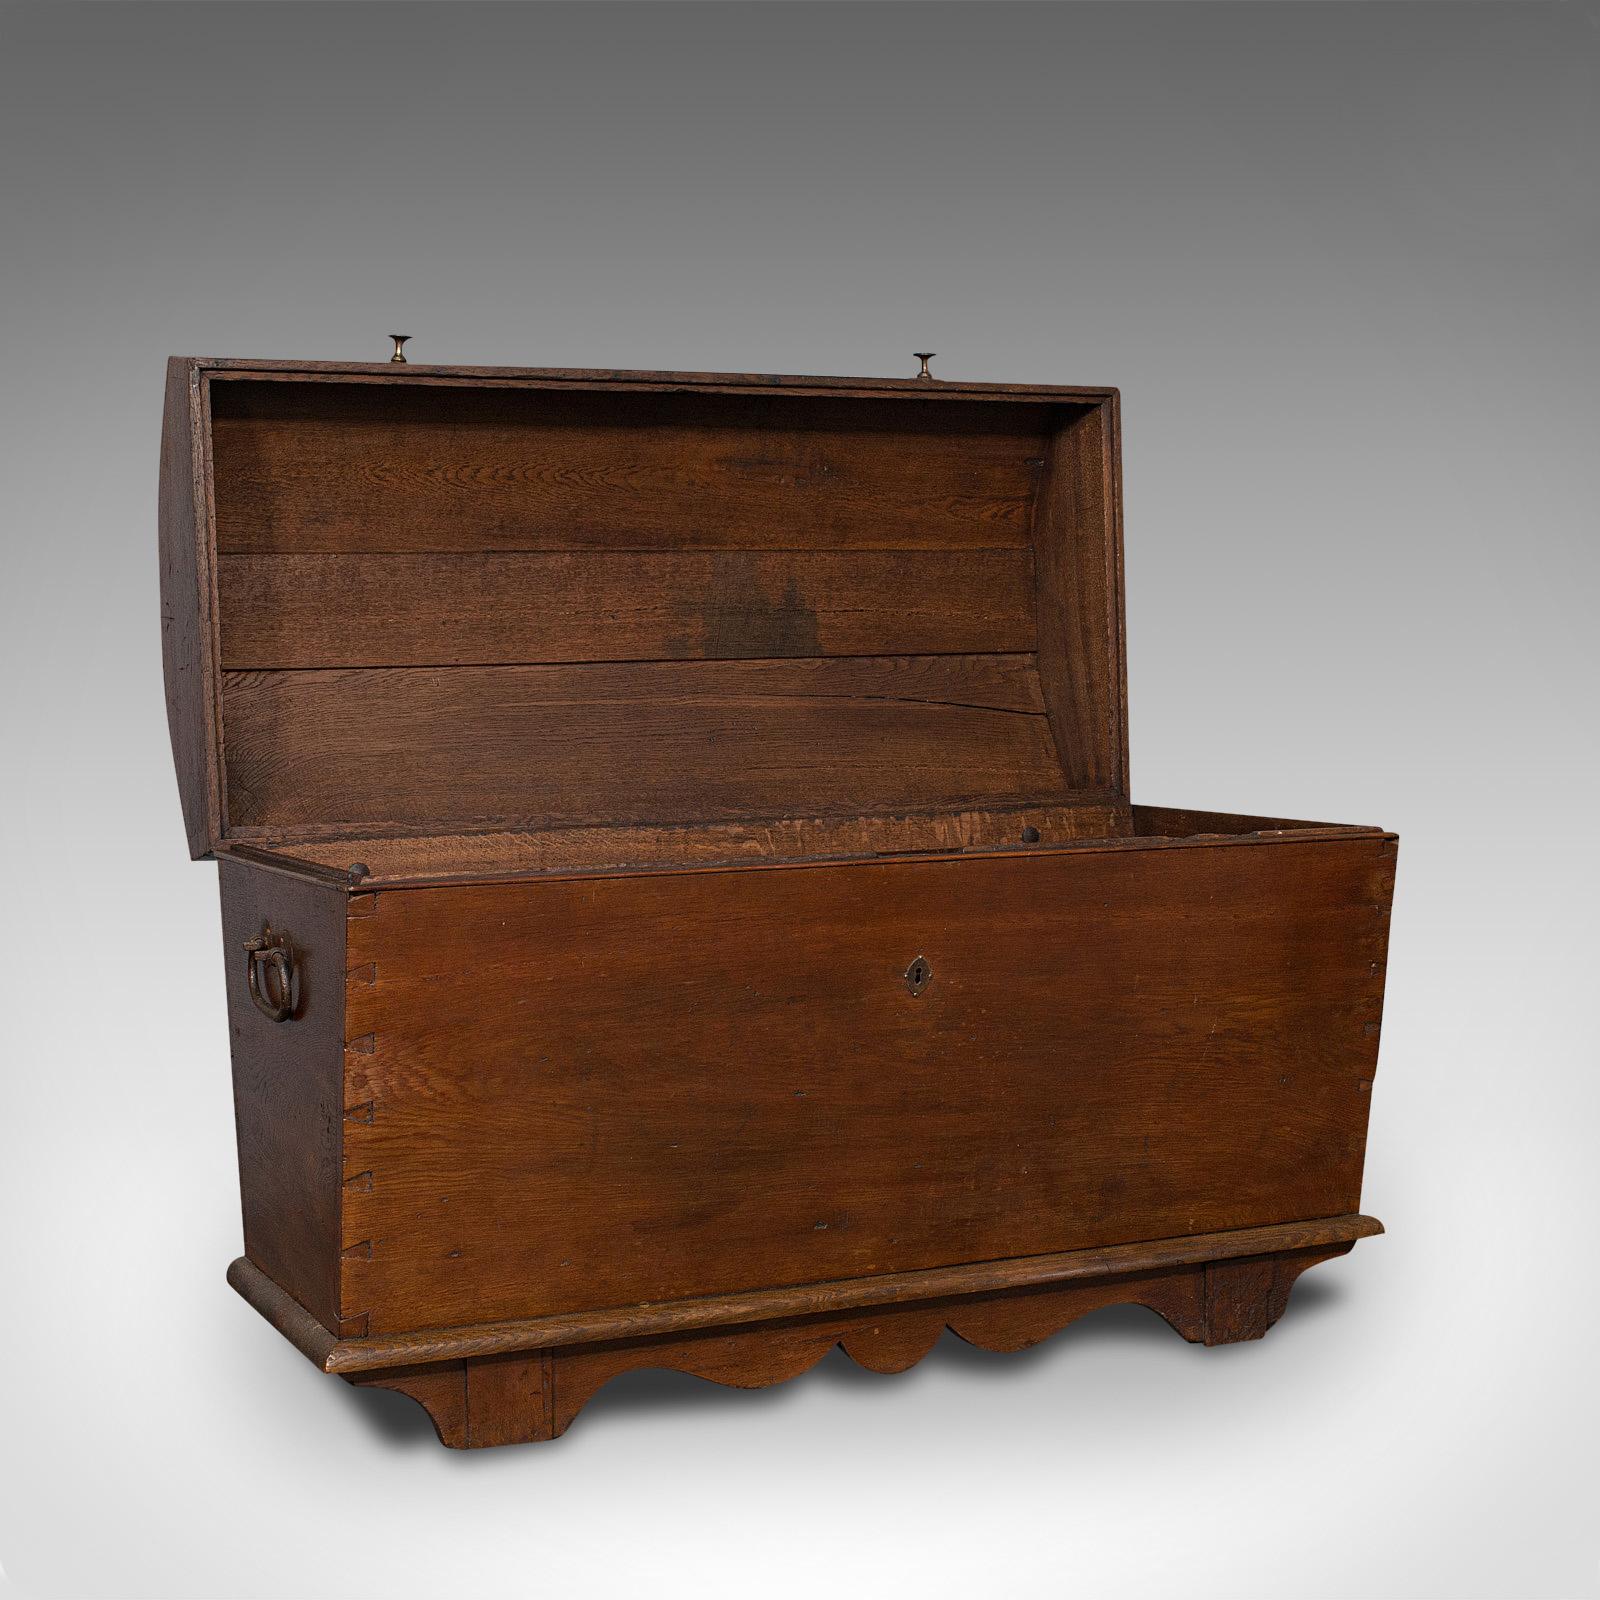 This is a large antique shipping chest. An English, oak carriage trunk, dating to the late 18th century Georgian period, circa 1800.

Beautiful dome-top chest with superb finish
Displaying a desirable aged patina
Select oak offers fine grain